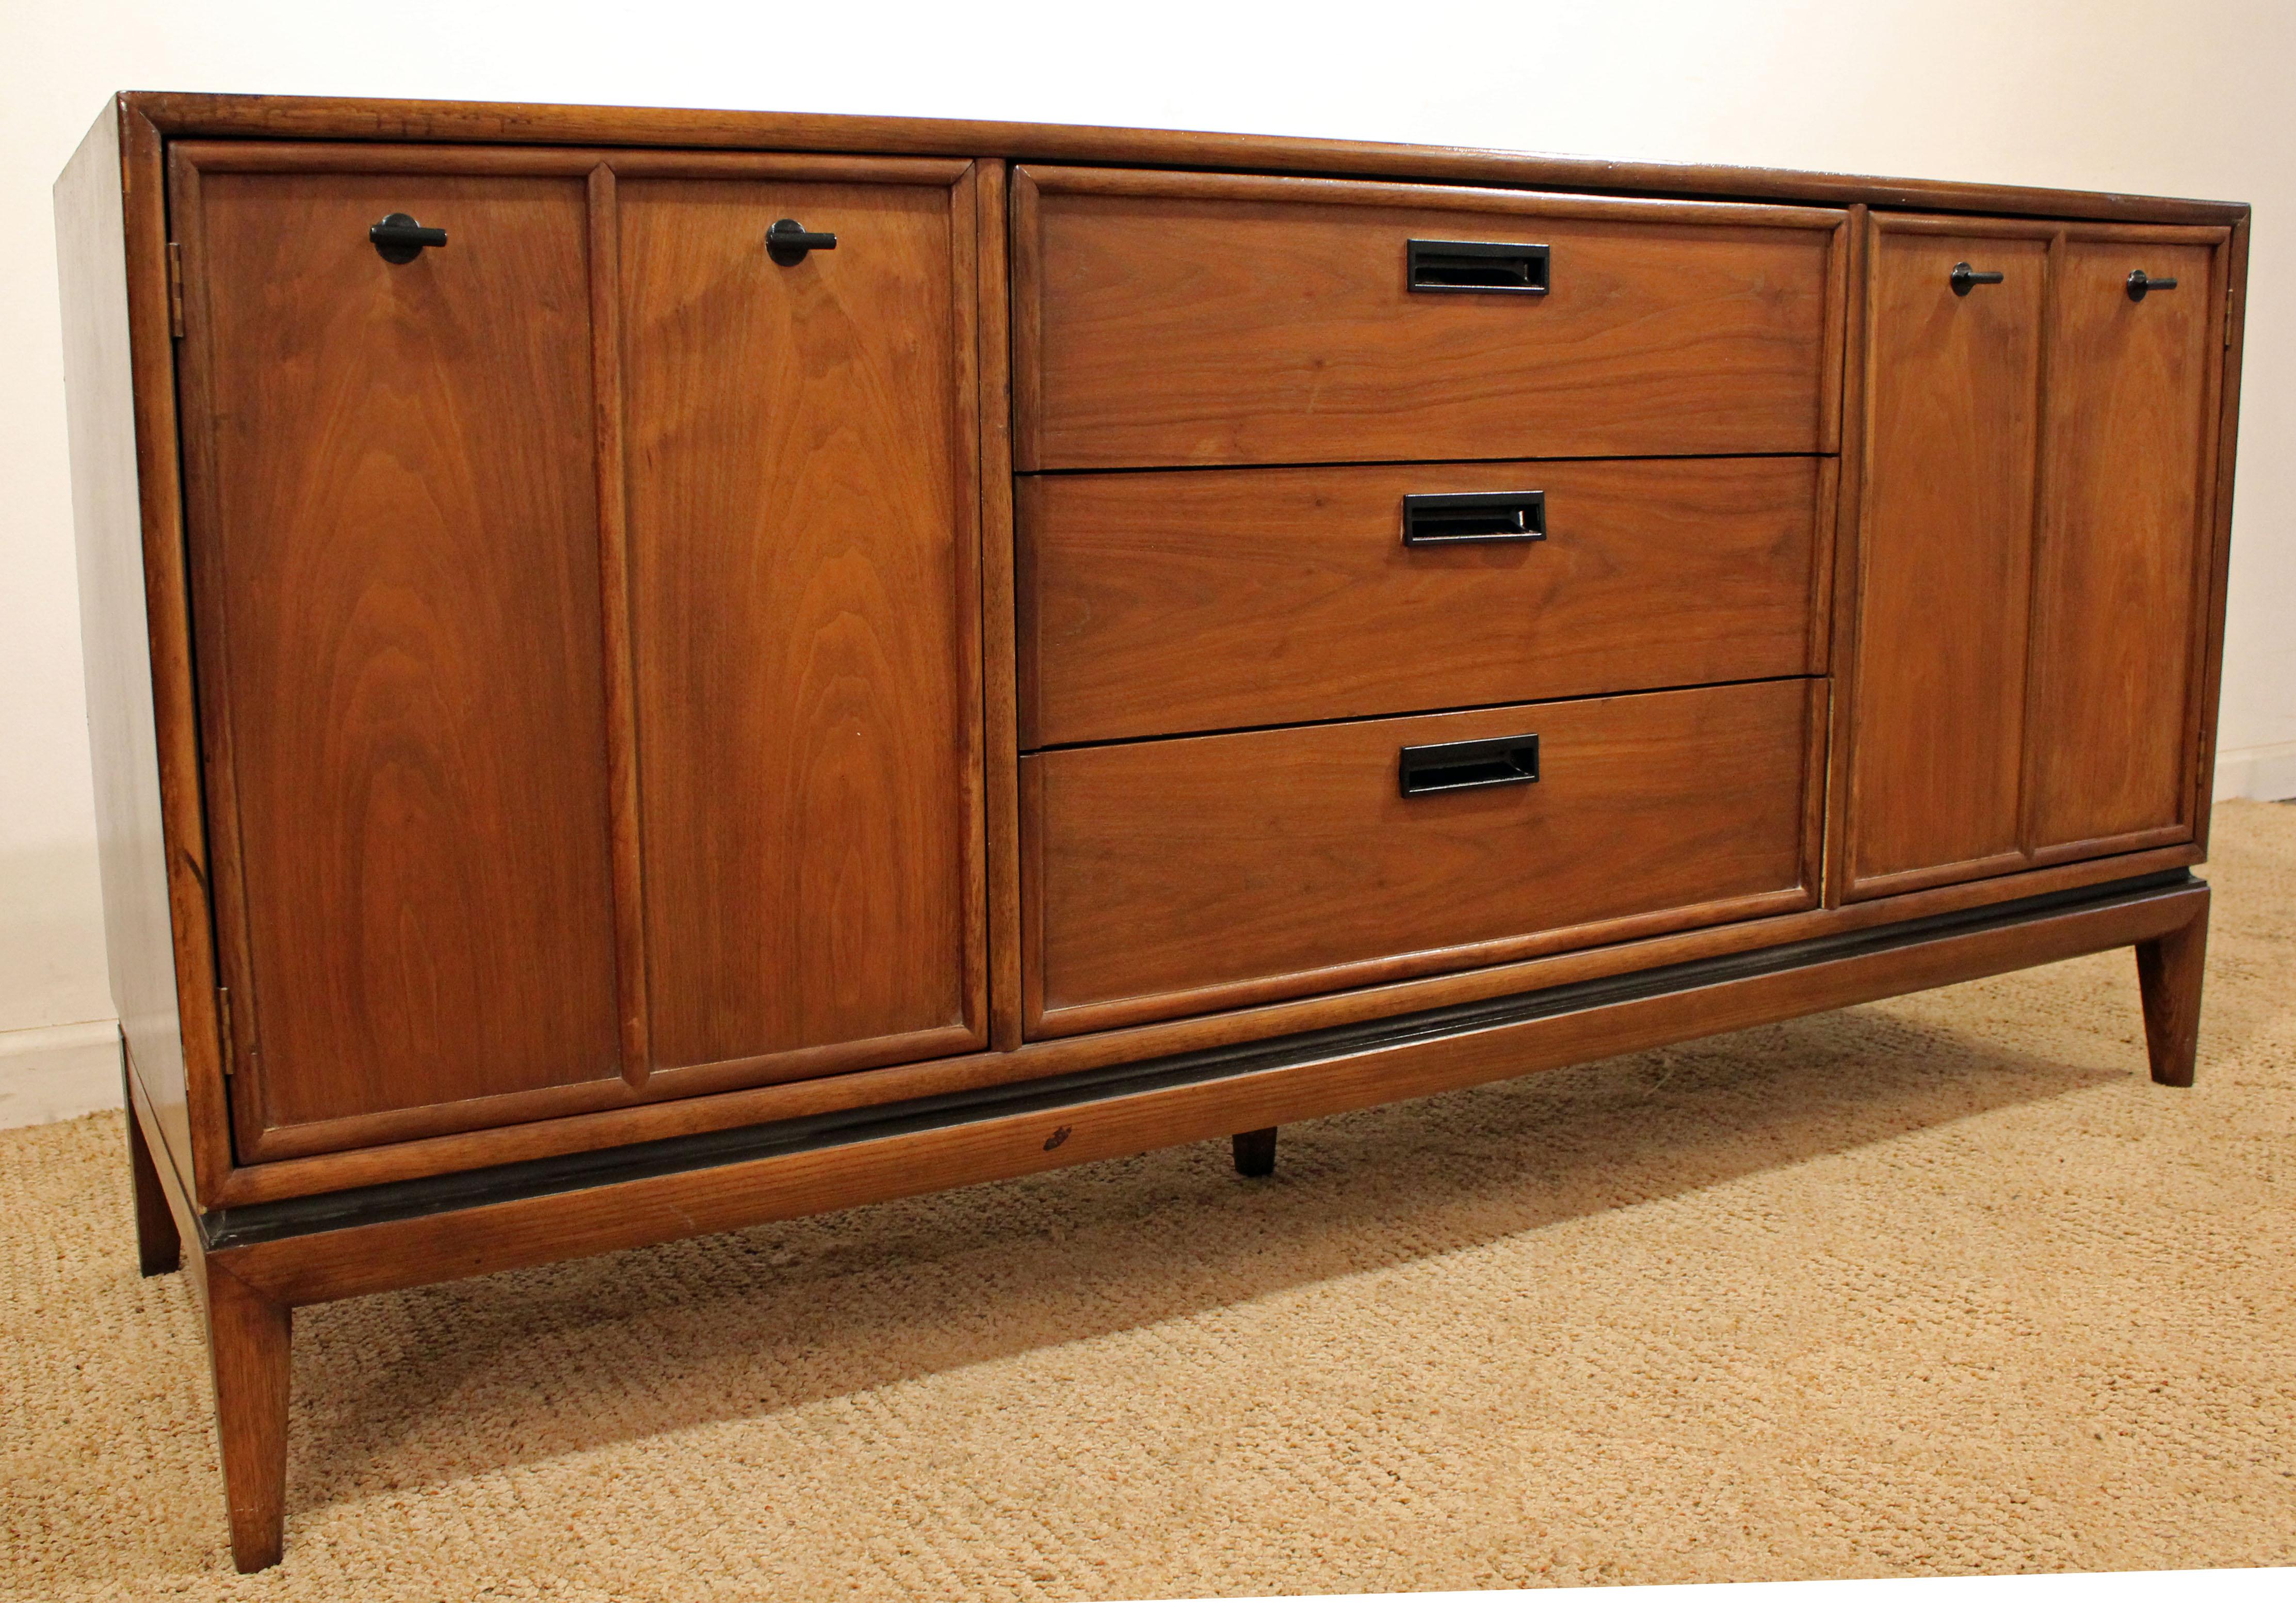 Offered is a Mid-Century Modern credenza. This piece is made of walnut, featuring two doors on each side (with inside shelving on the right side, no shelving on the left) and three centre drawers. The top has been refinished. It is marked by